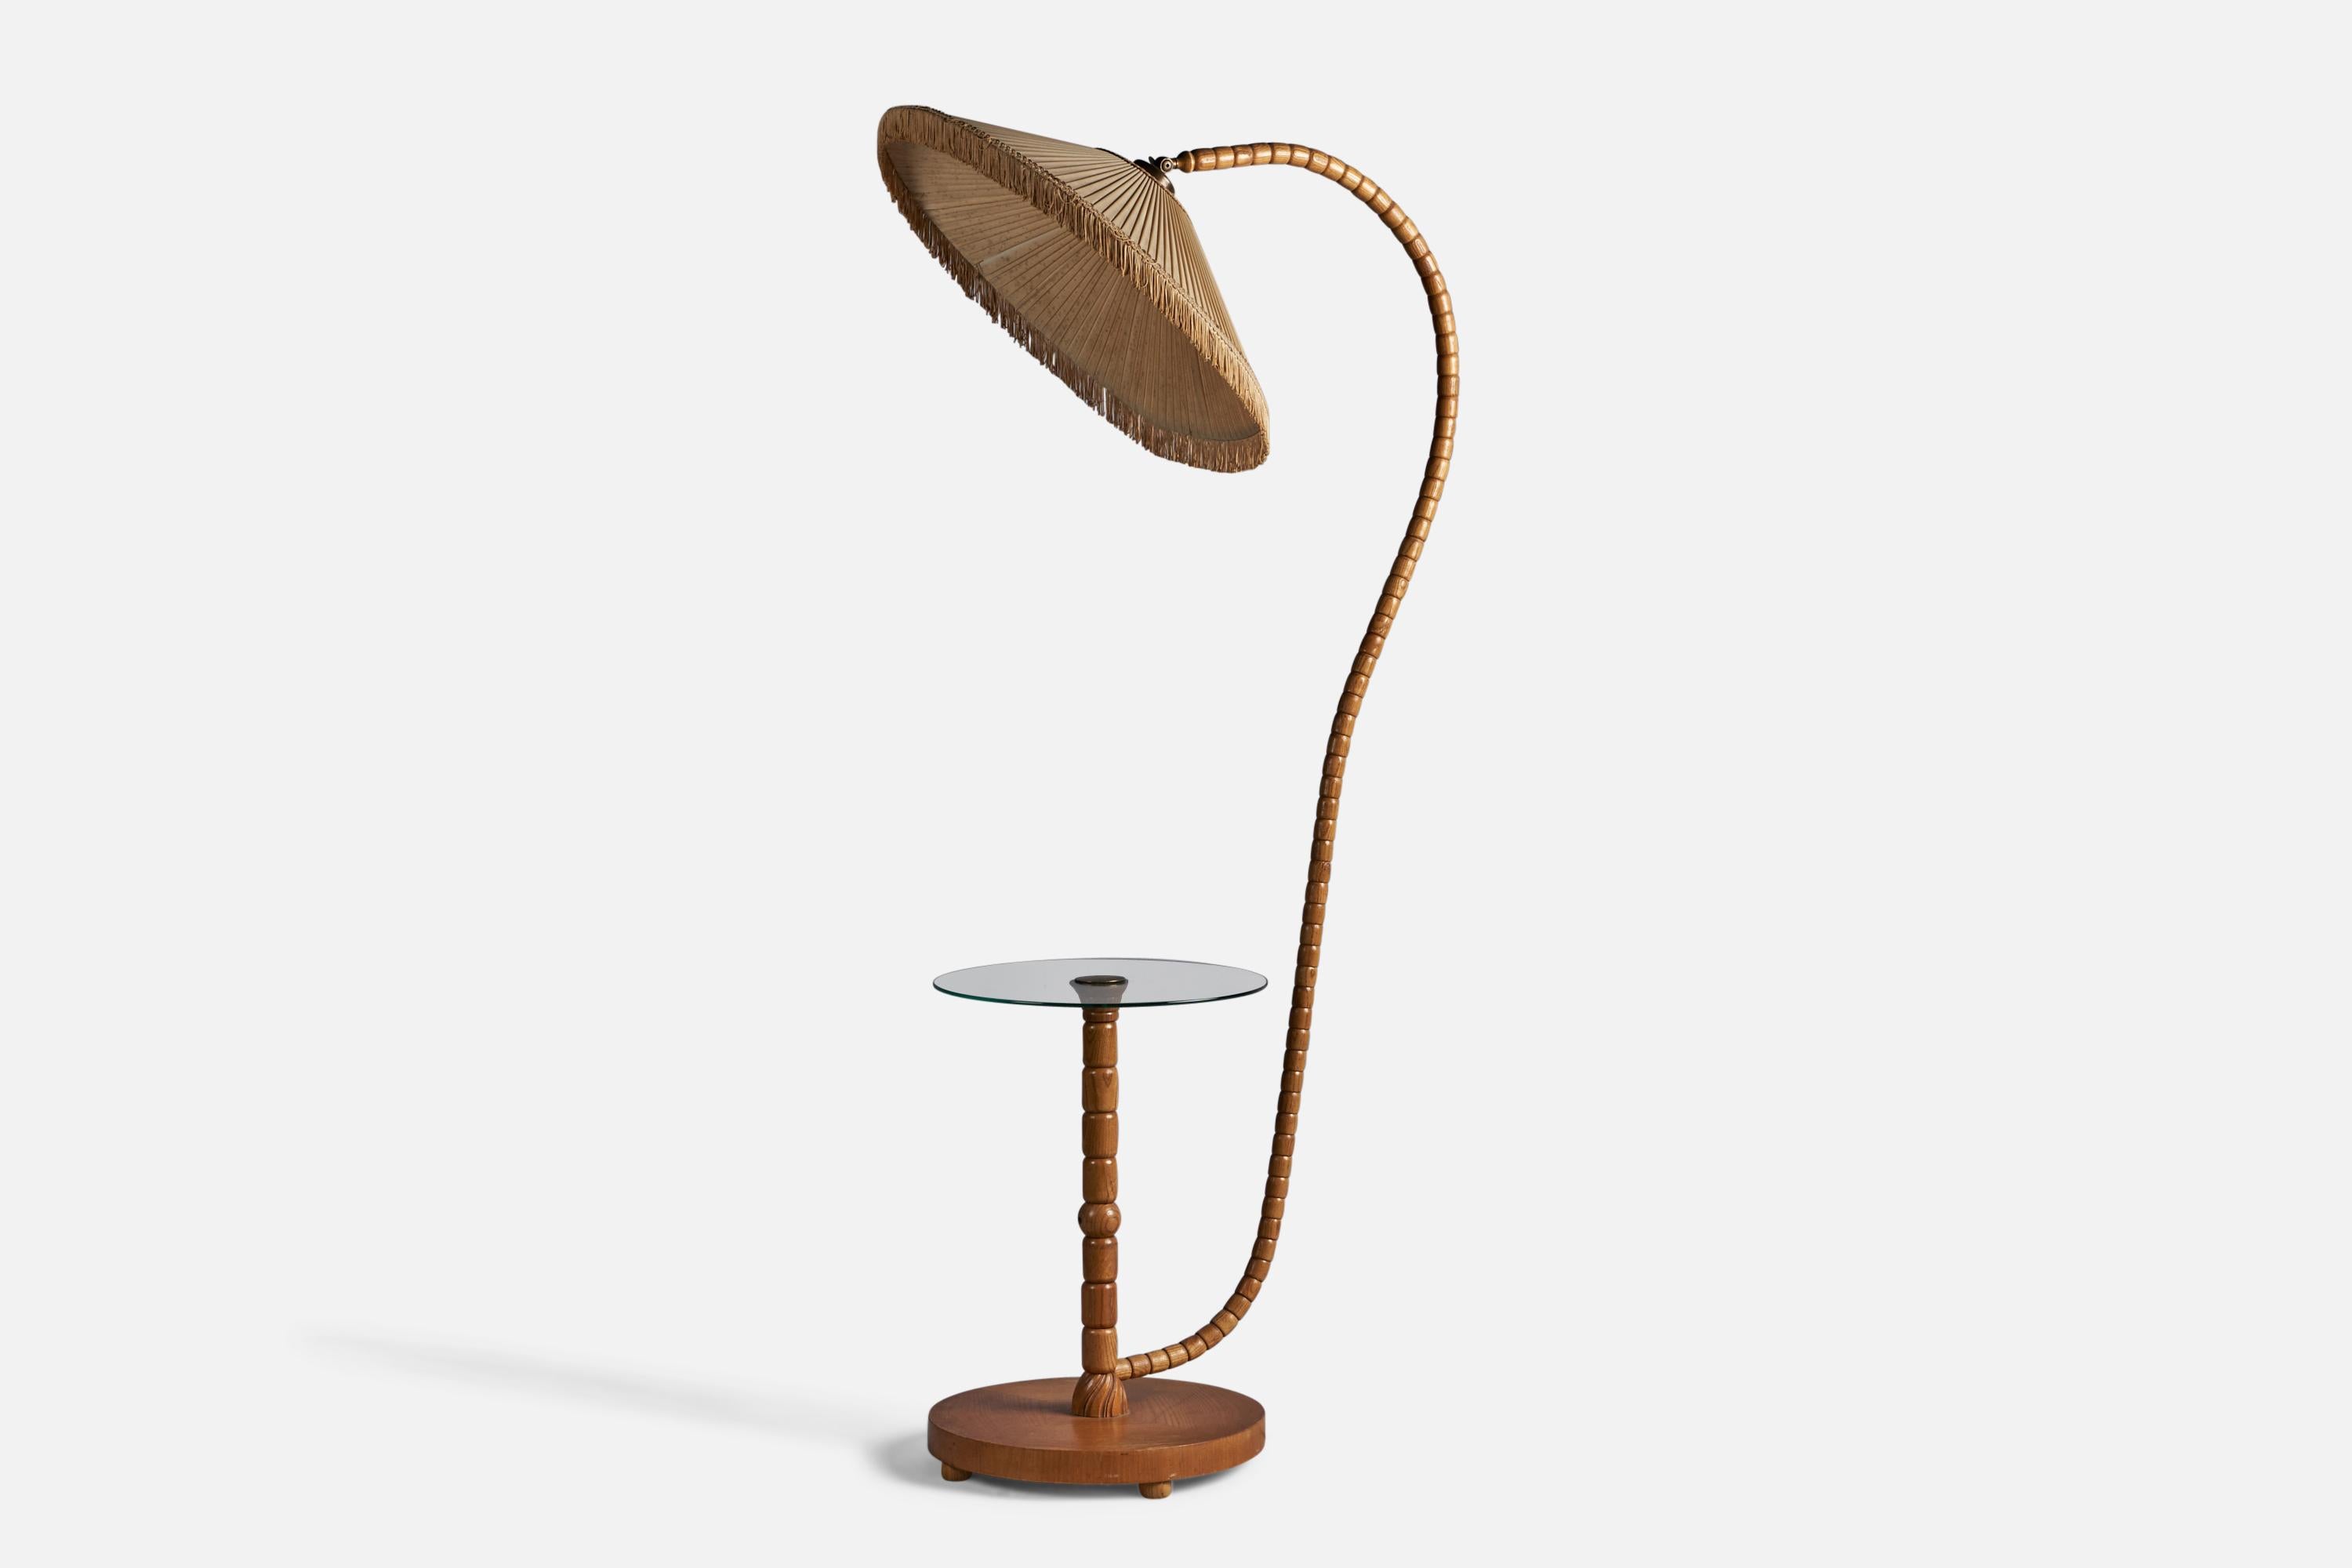 A pine, fabric, brass and glass floor lamp with side table or lamp table, designed and produced in Sweden, c. 1930s.

Overall Dimensions (inches): 63.5